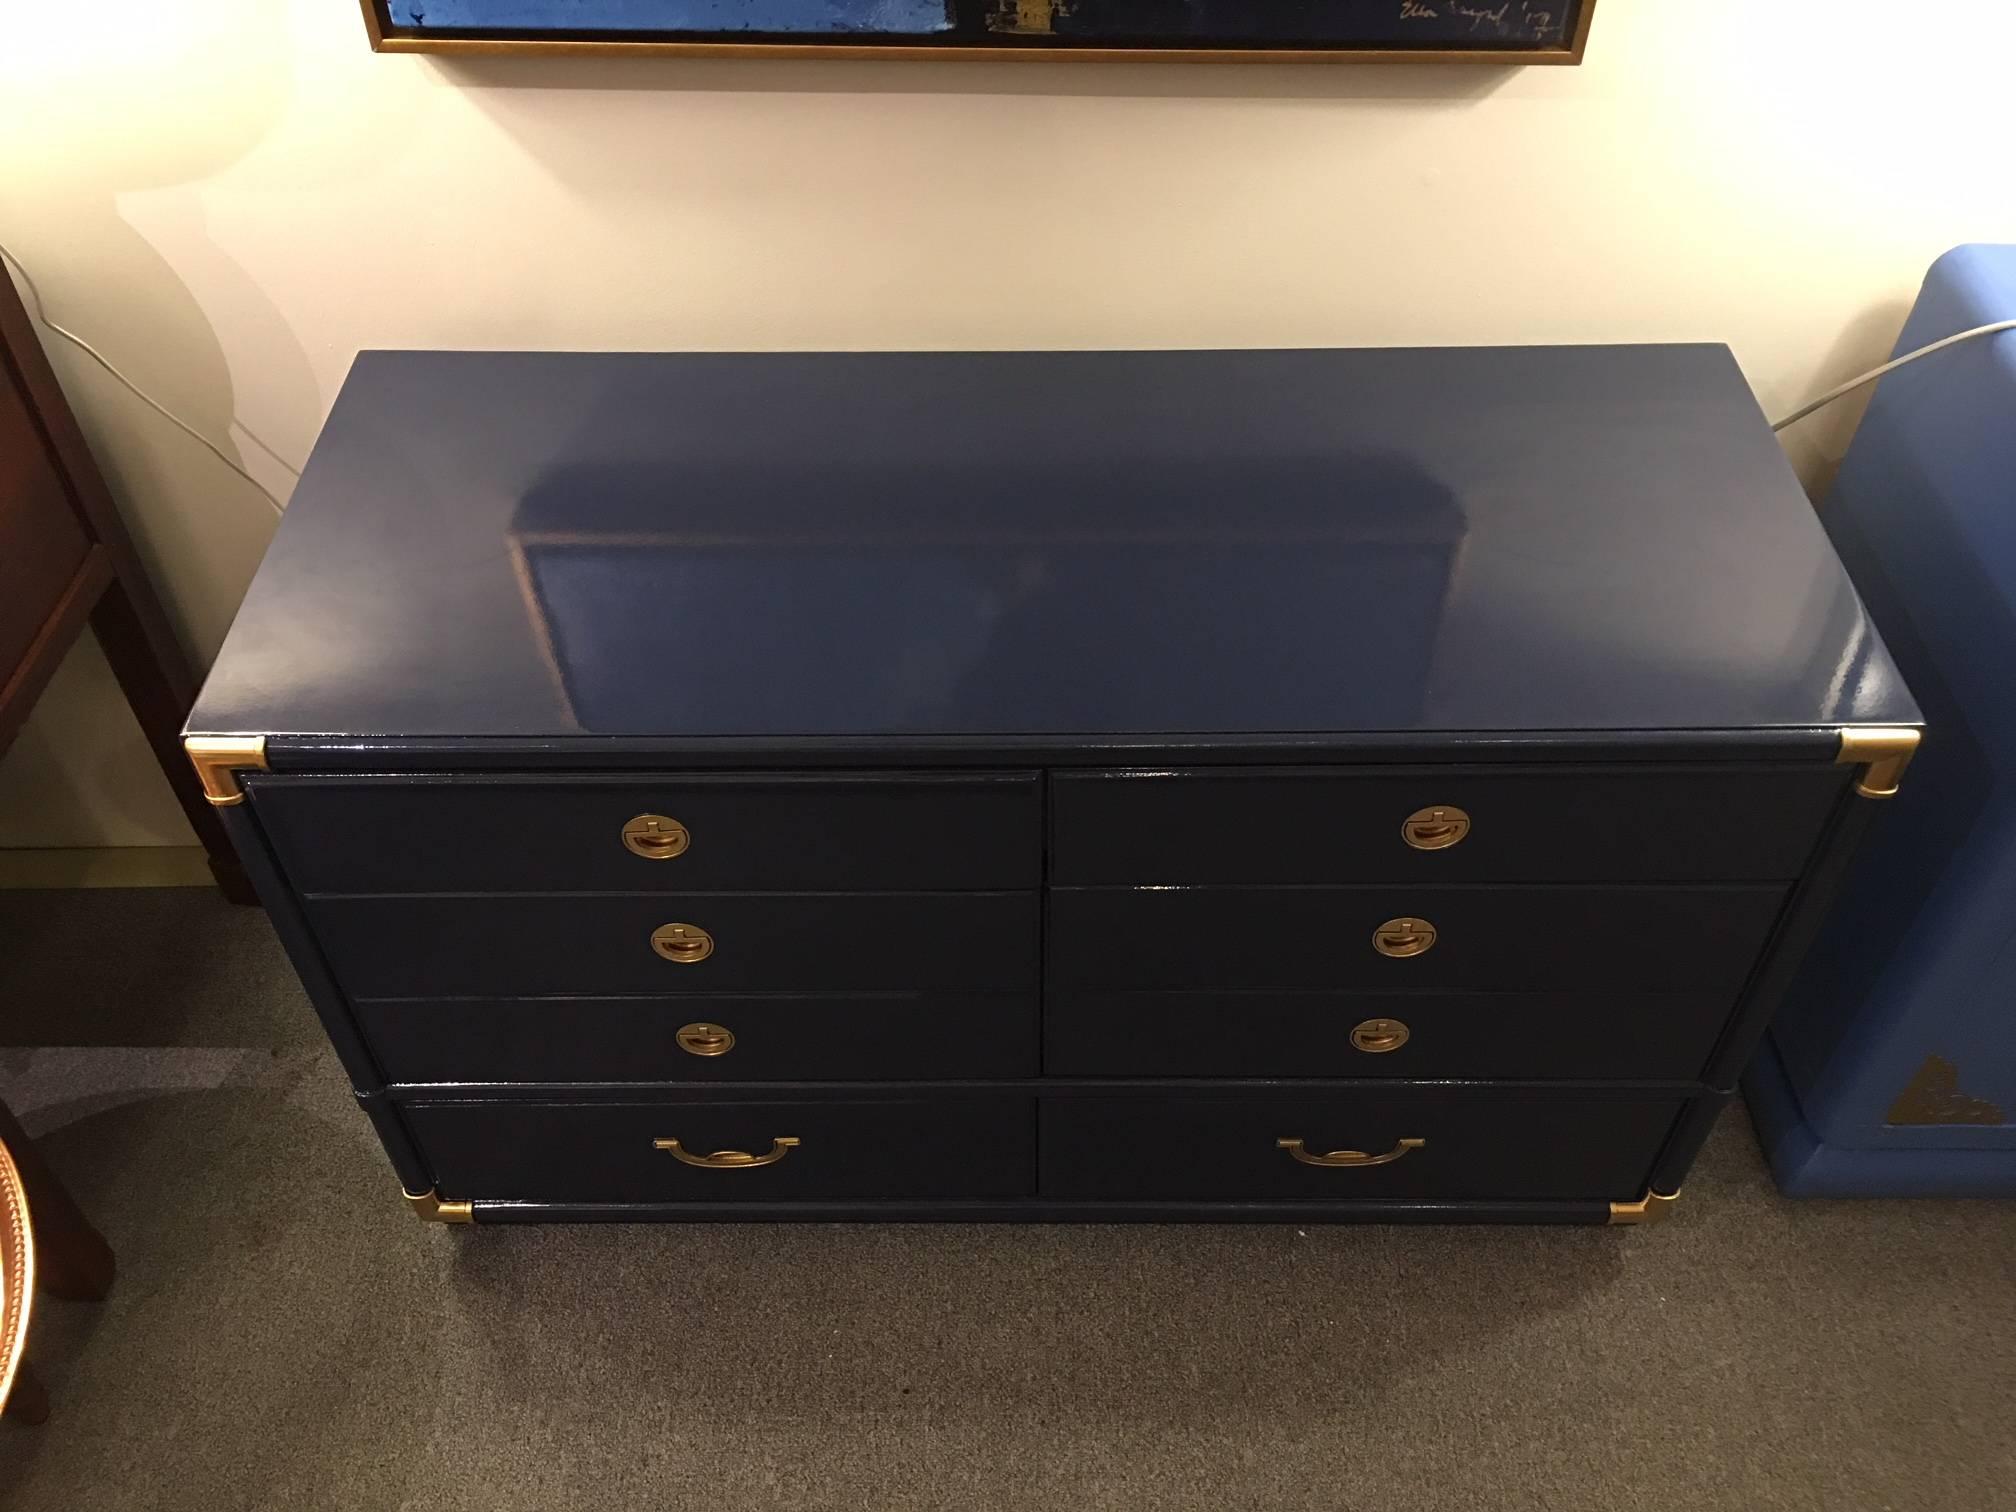 This six-drawer Classic Campaign dresser is dressed in crisp nautical colors of gold and blue and ready for any room in your home. Made by Dixie.